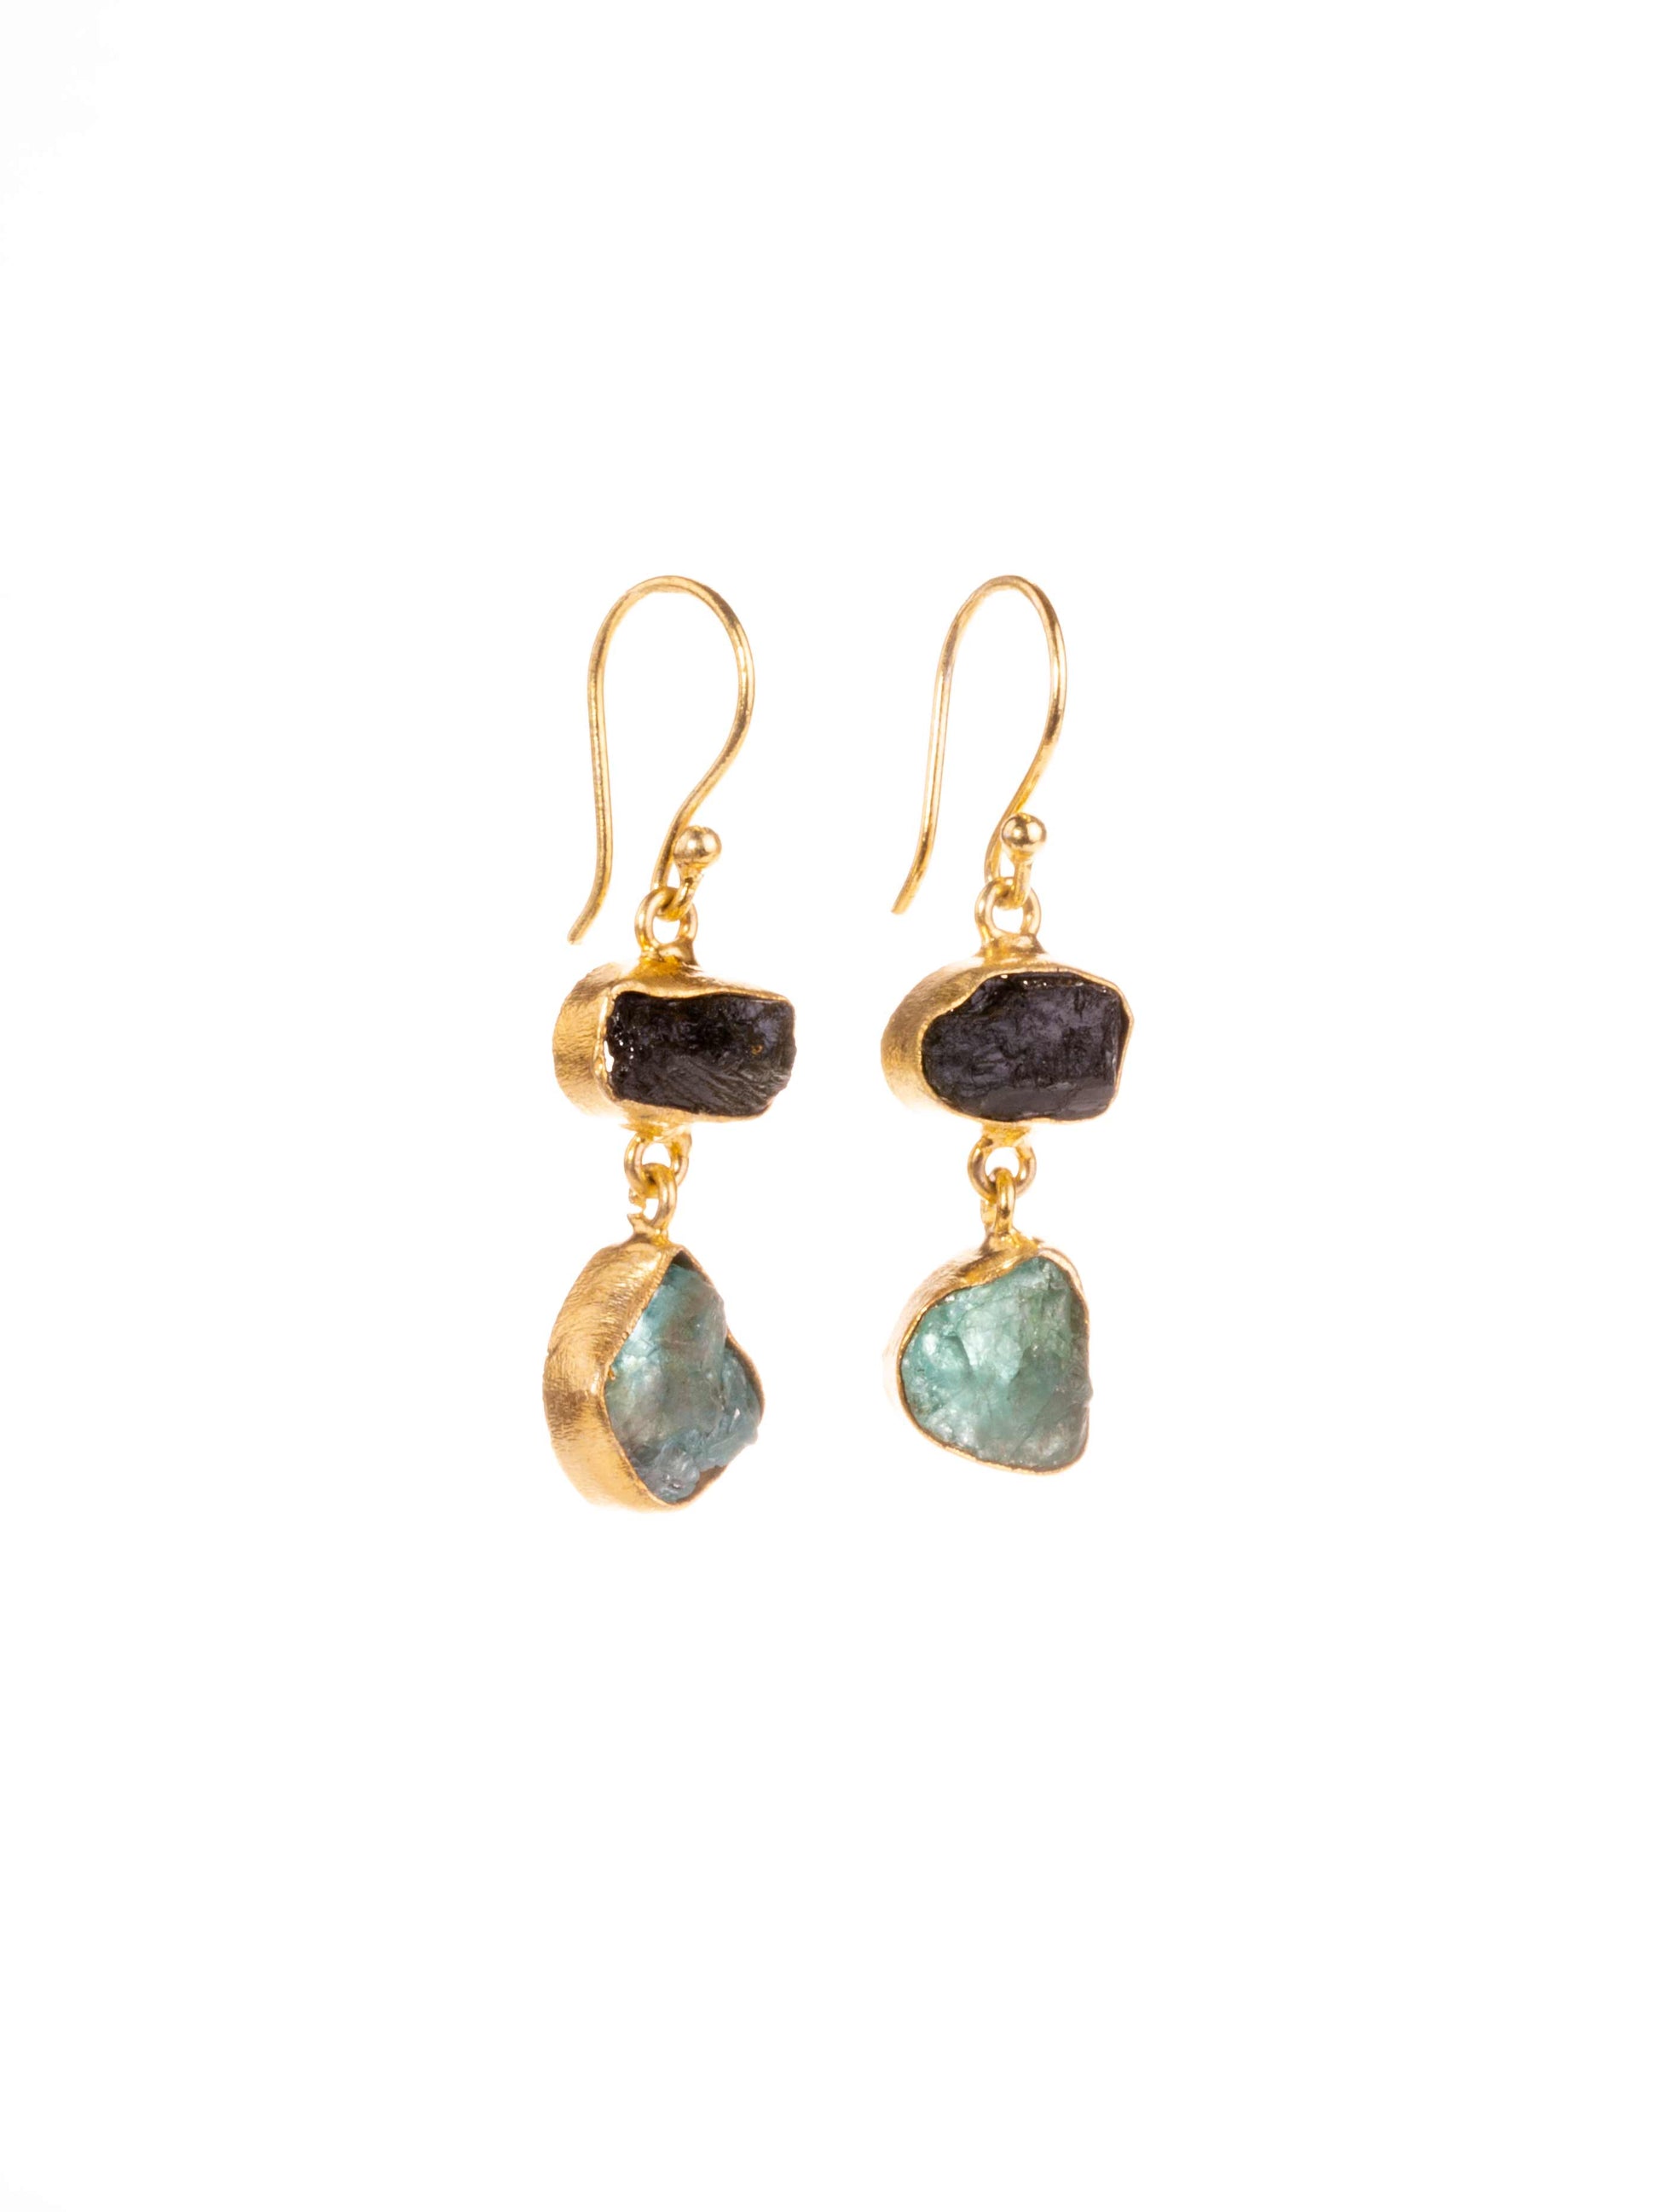 Gold Luxe earrings -  tourmaline and sky apatite double drop dangles